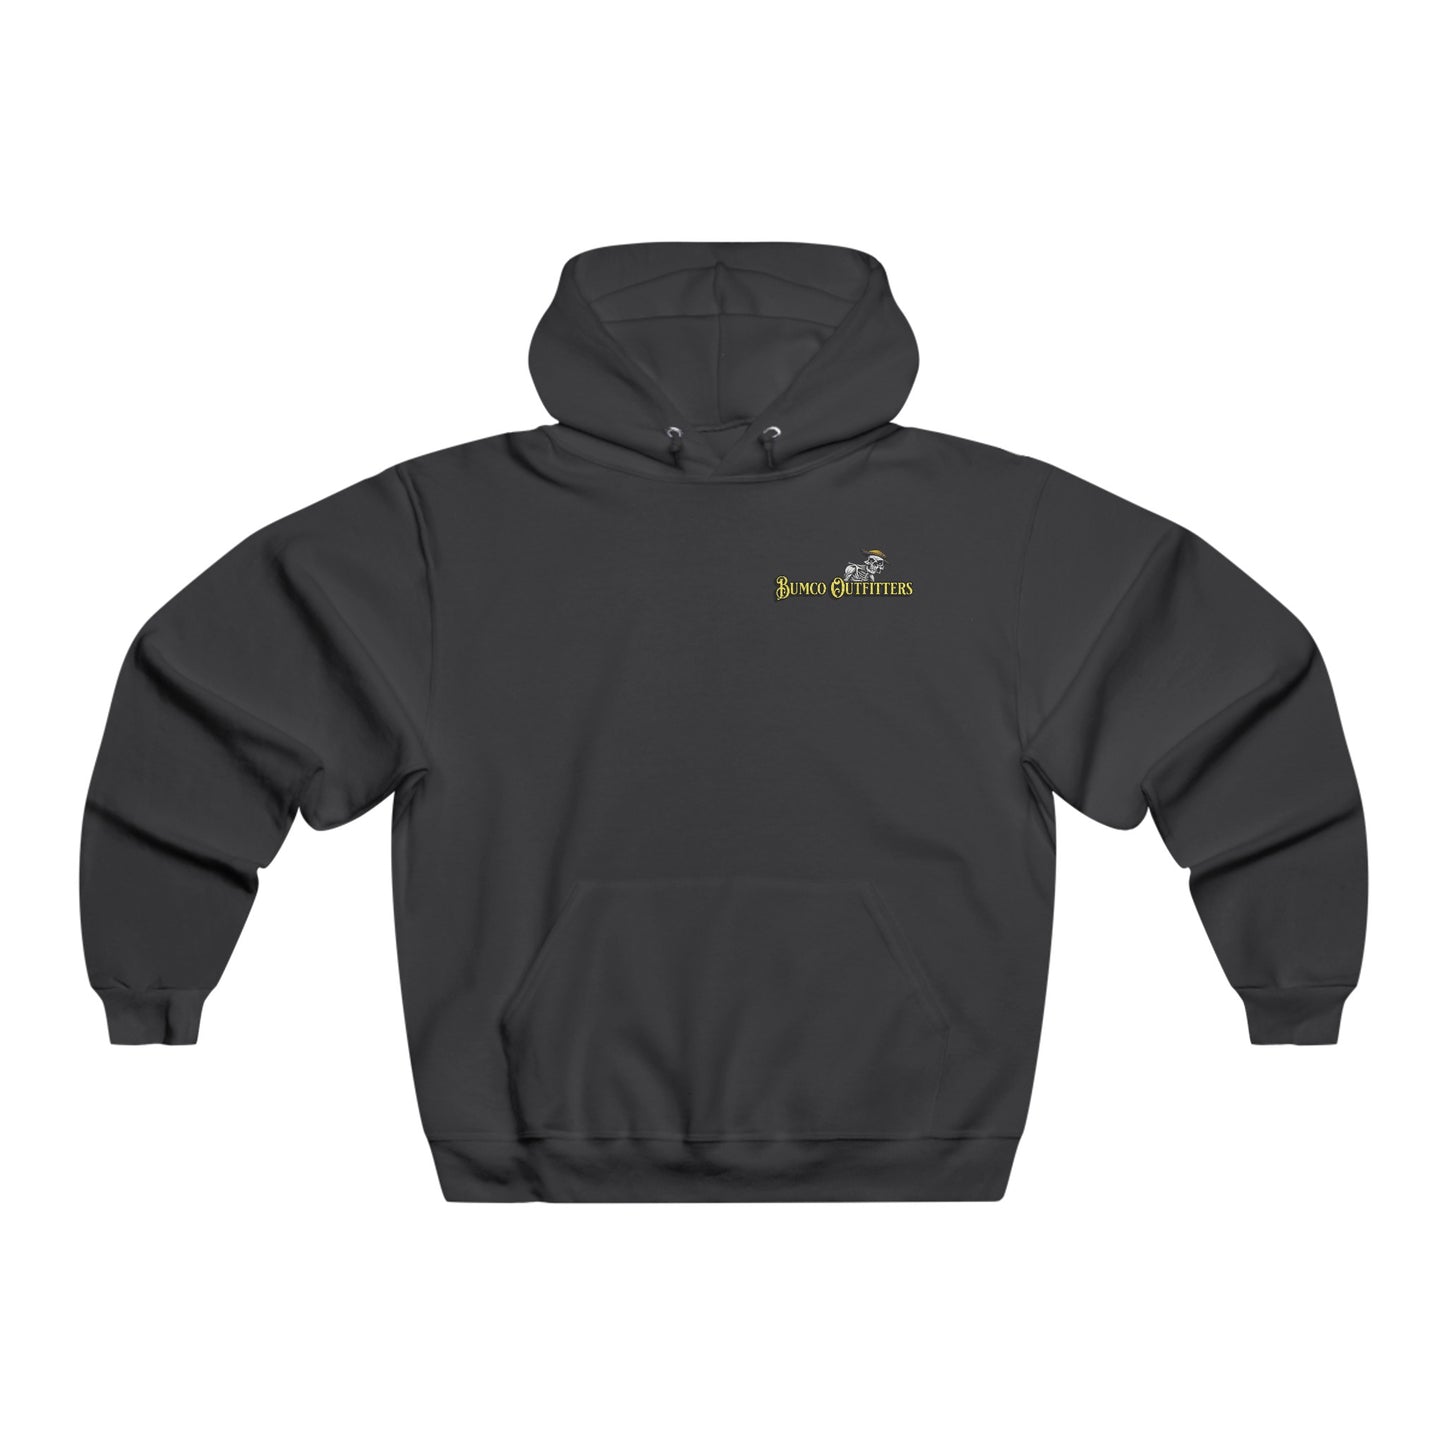 Prohibition Supervision - Hoodie